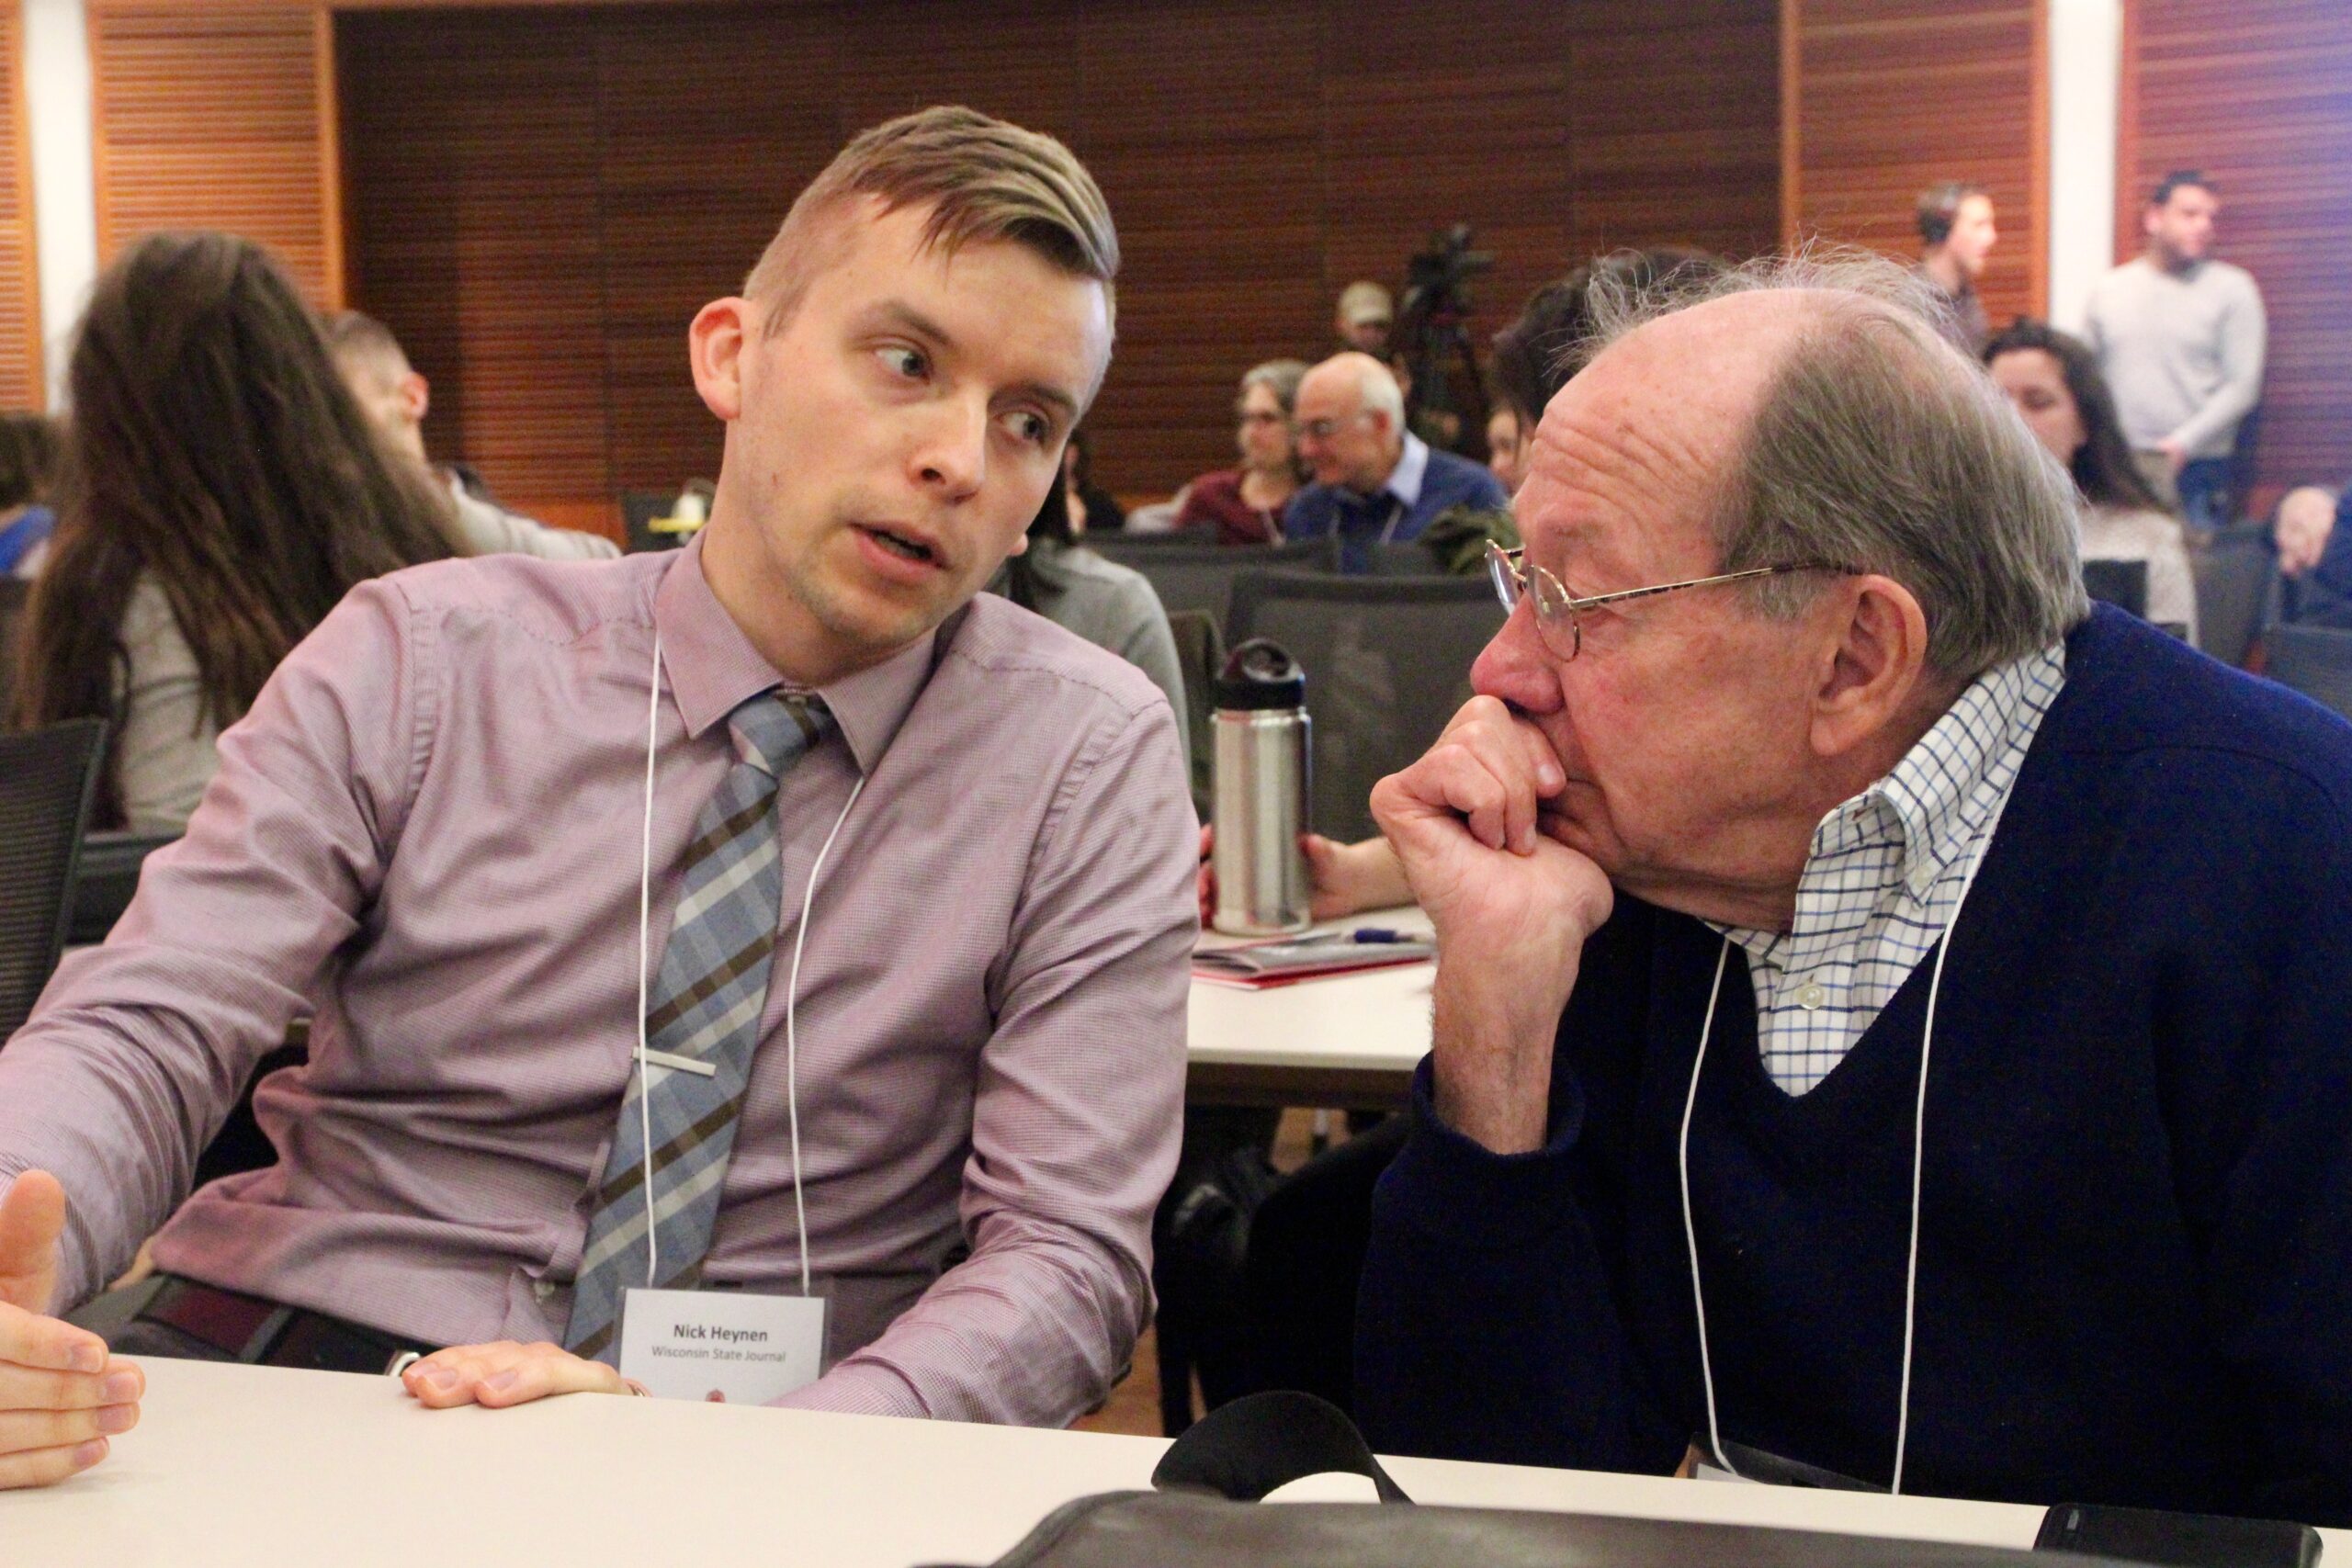 Jim Burgess (right) speaks with Nick Heynen (left) at the conference, “What MeToo Means for Gender, Journalism and Power,” organized in 2018 by the Center for Journalism Ethics at UW–Madison.